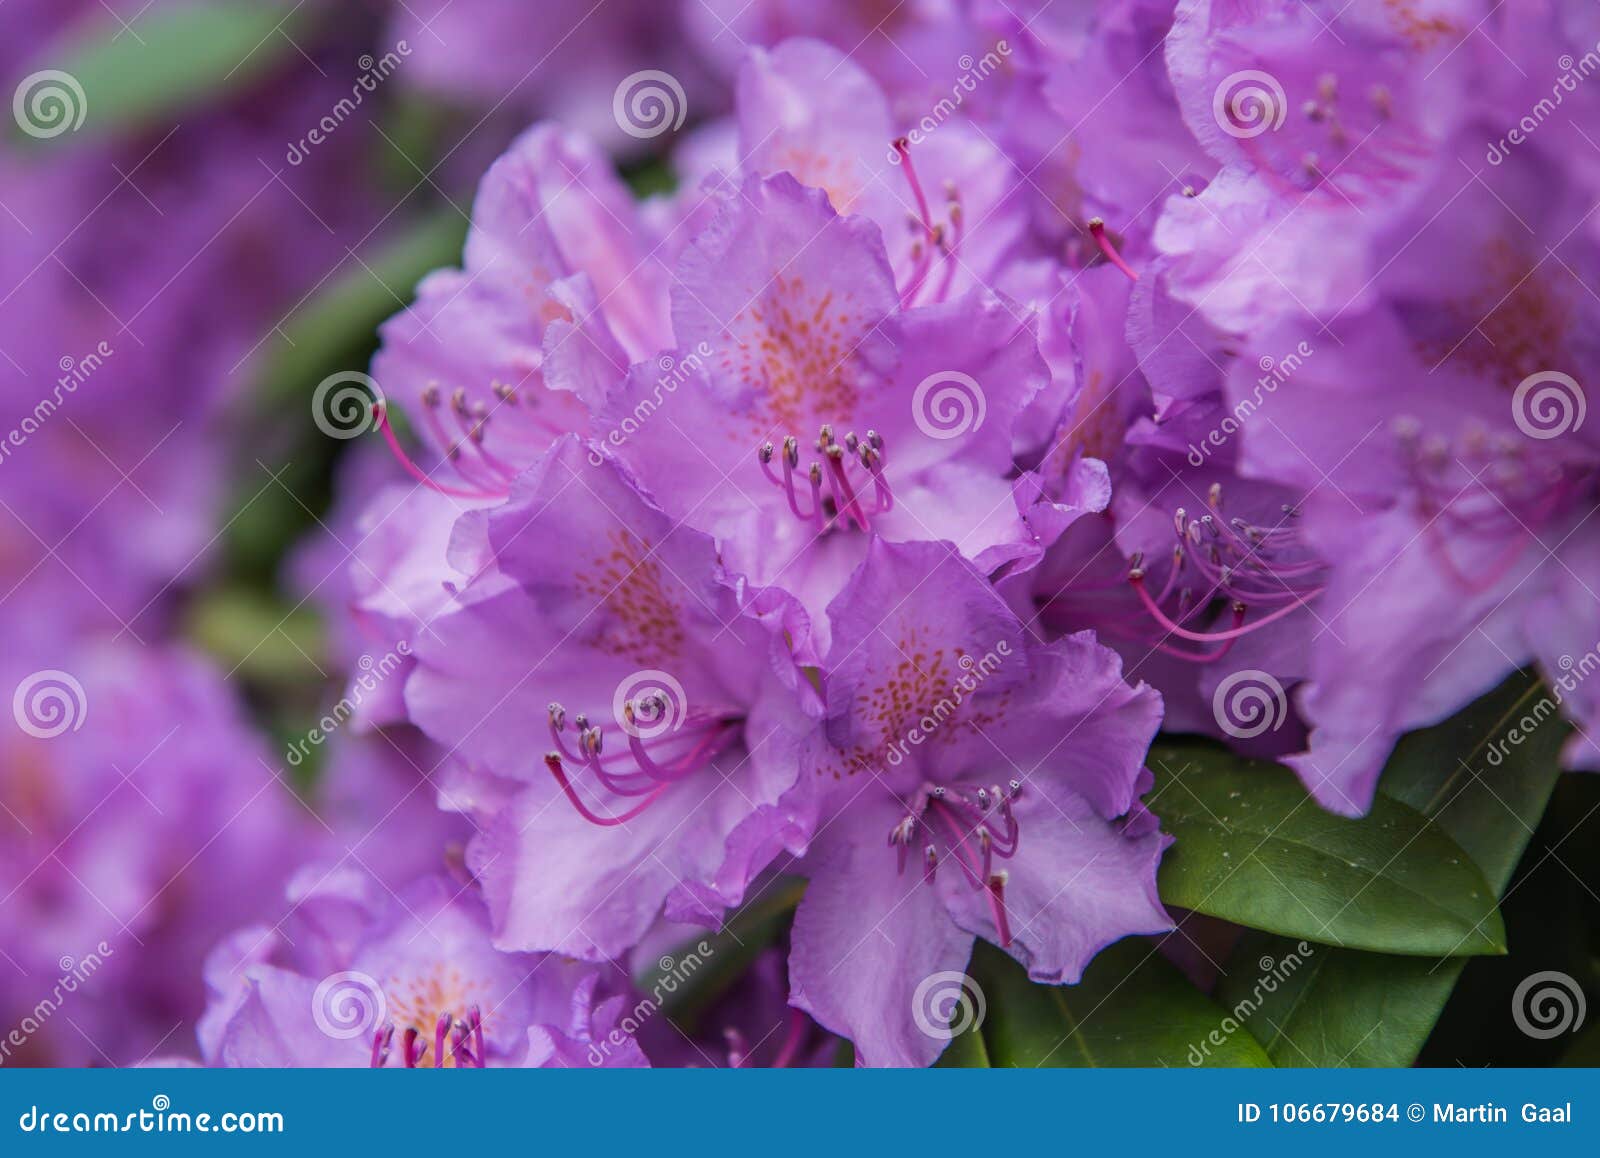 blooming purple rhododendron, petals detail